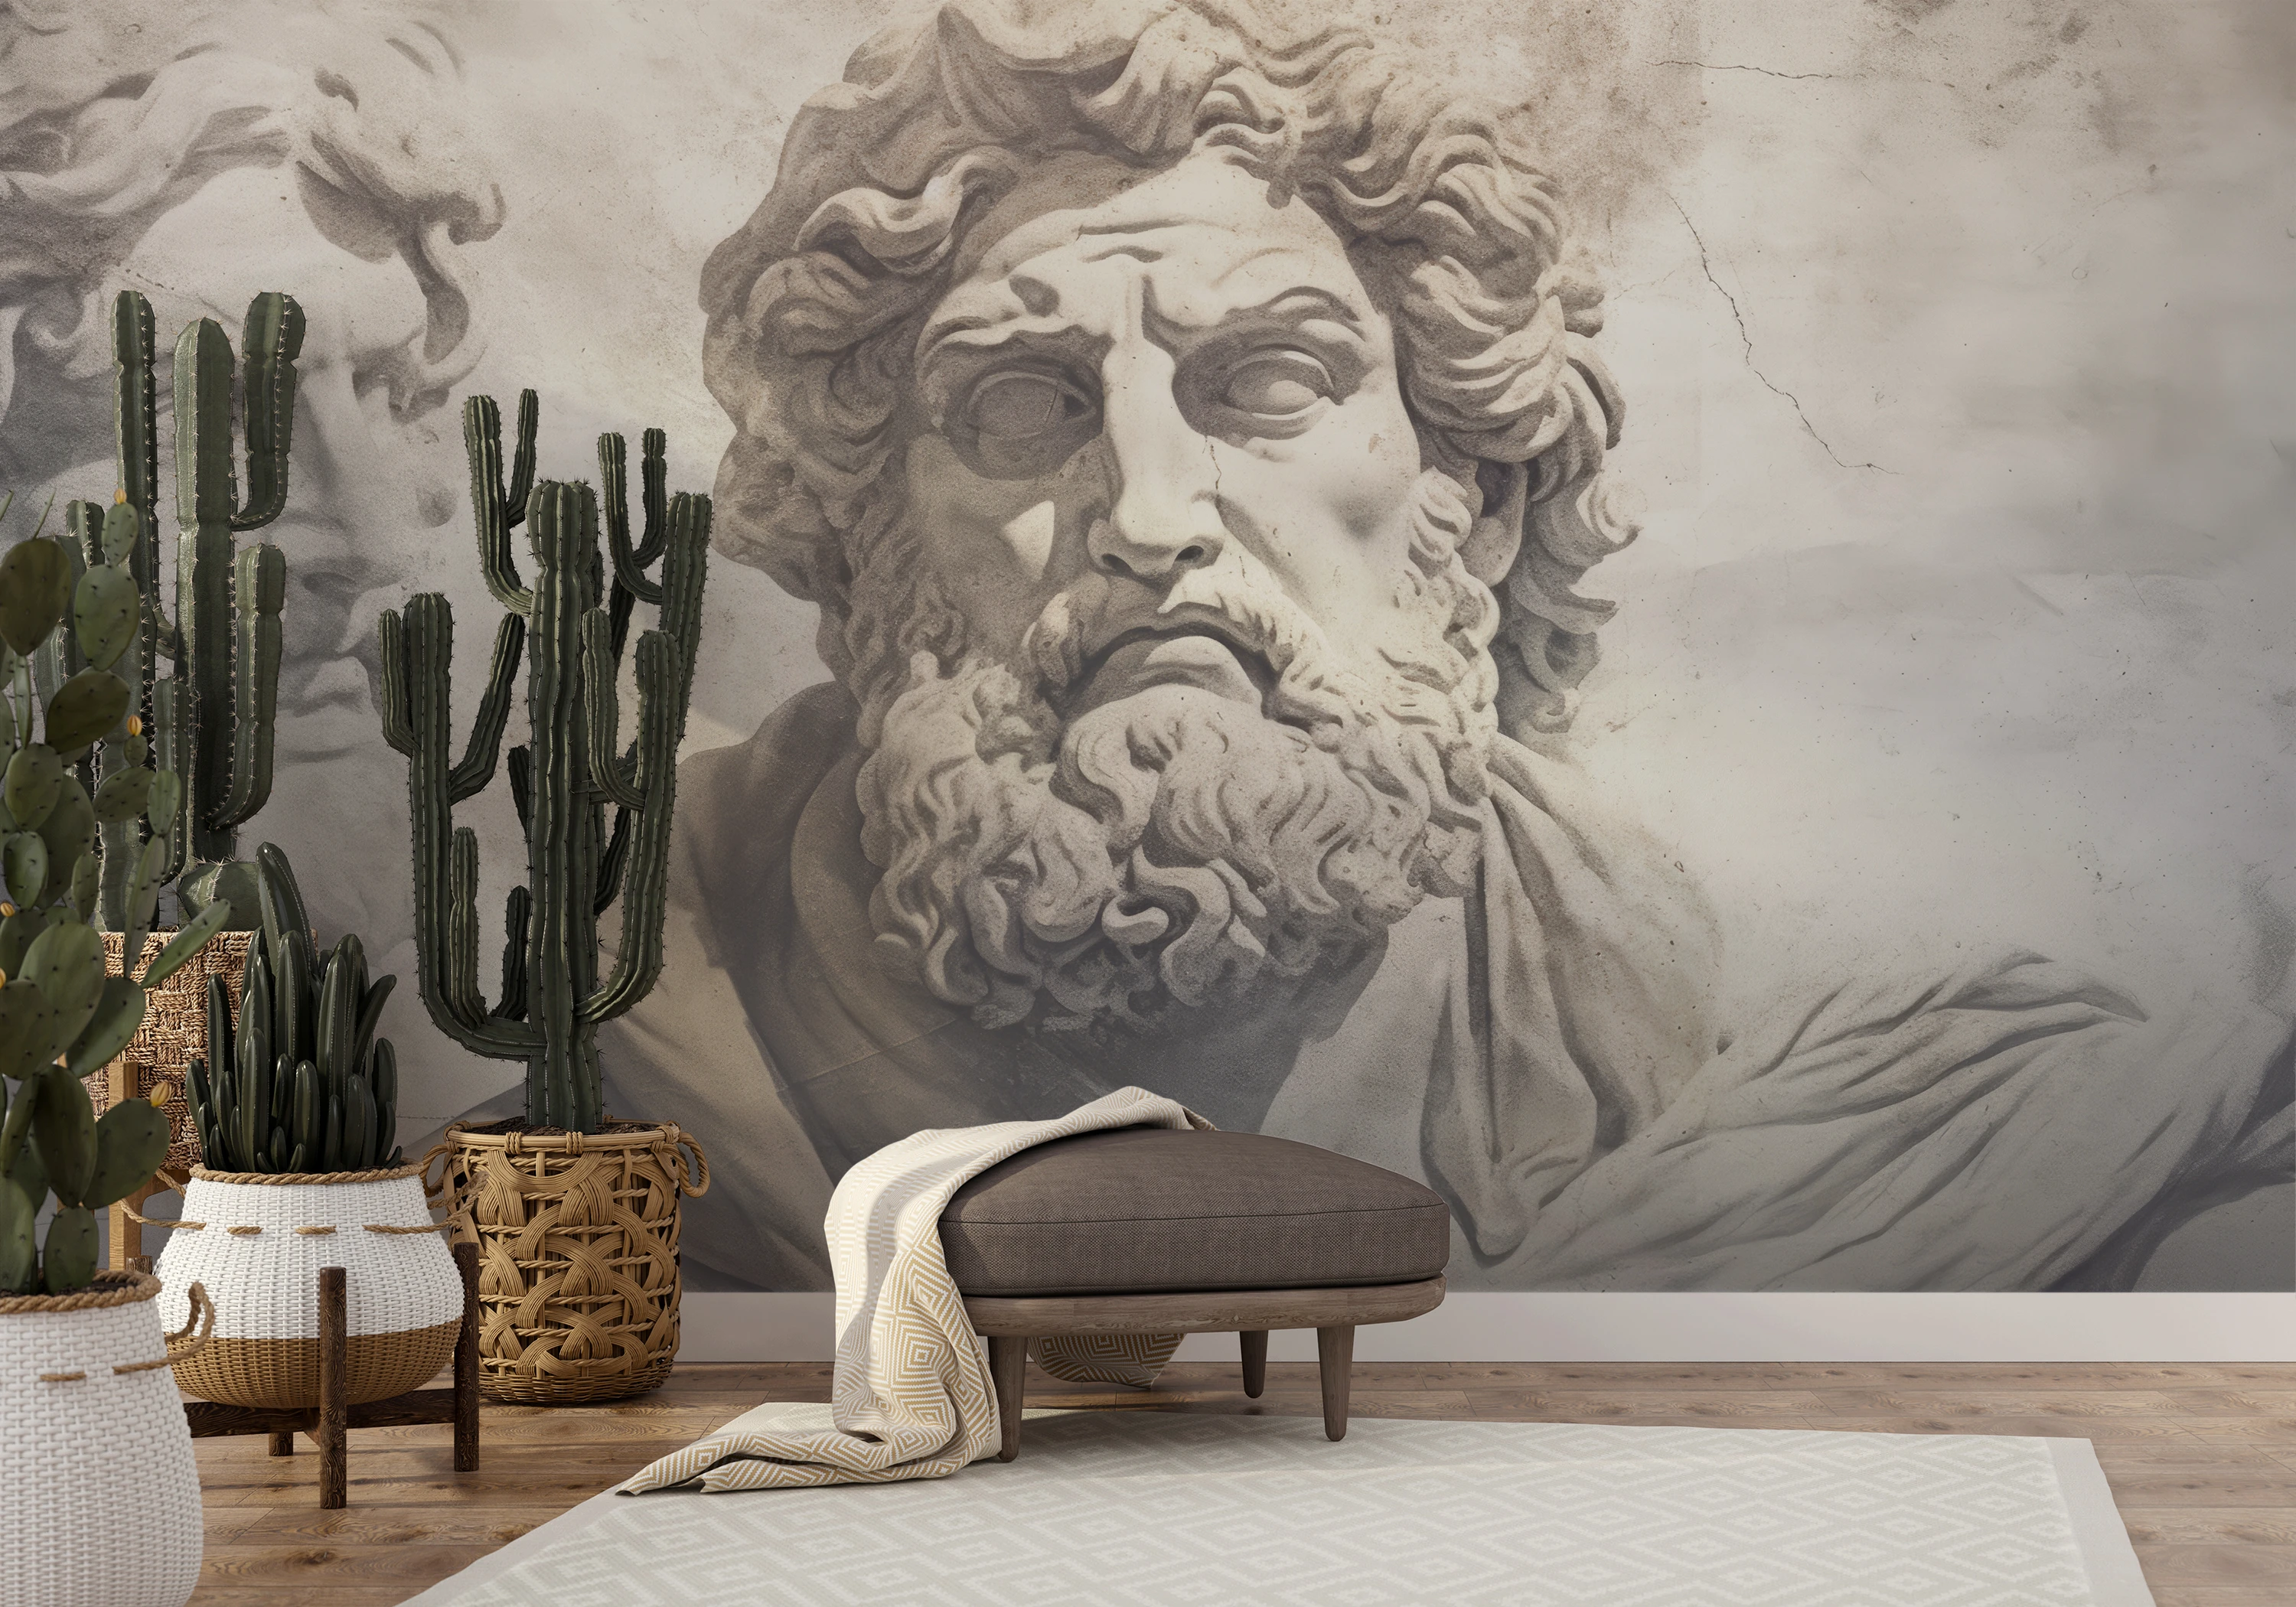 The wallpaper presents a group of classical Greek philosophers in half-profile, with developed facial expressions, suggesting in-depth discussion, on a marble background.